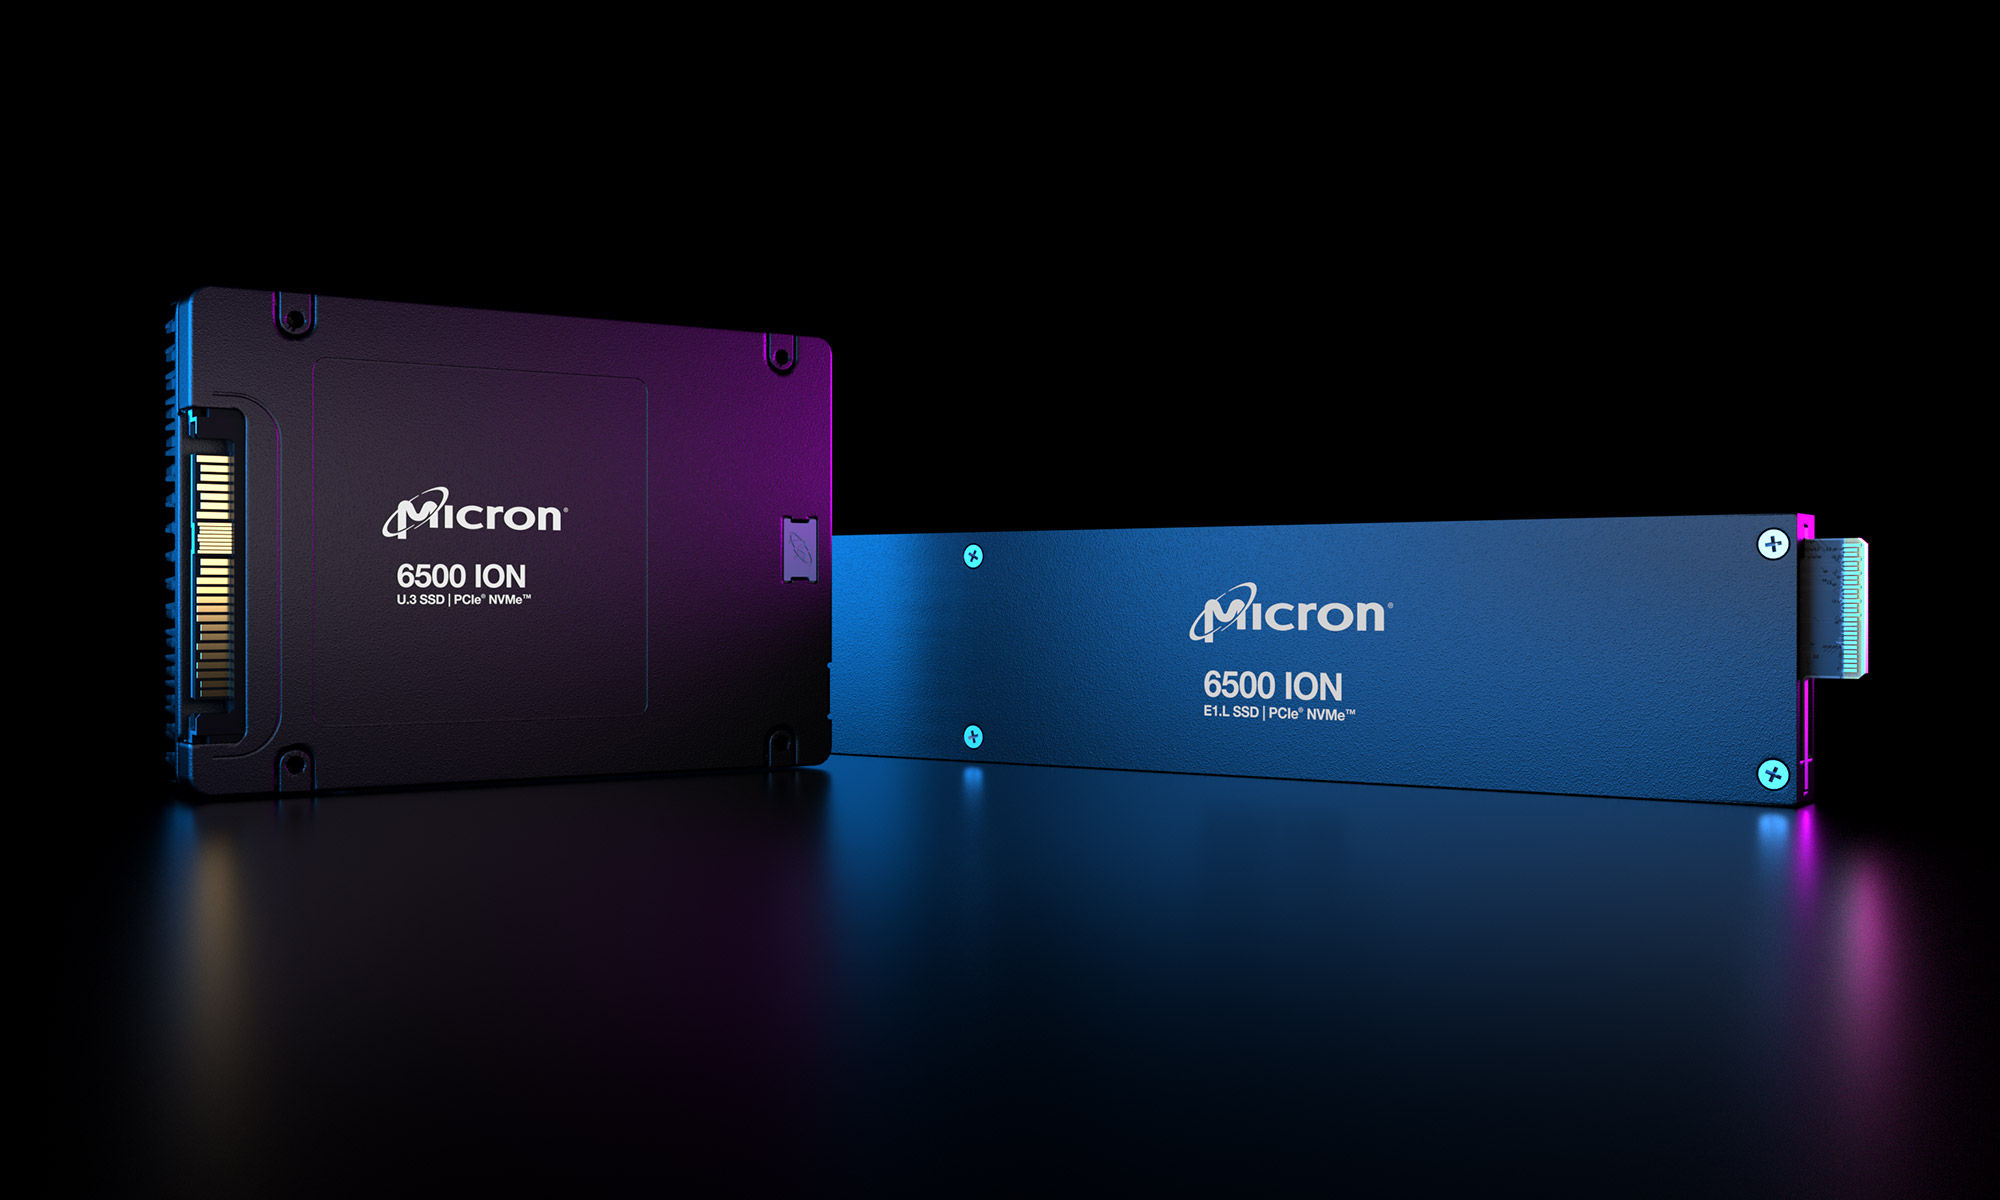 Micron XTR and 6500 ION SSDs